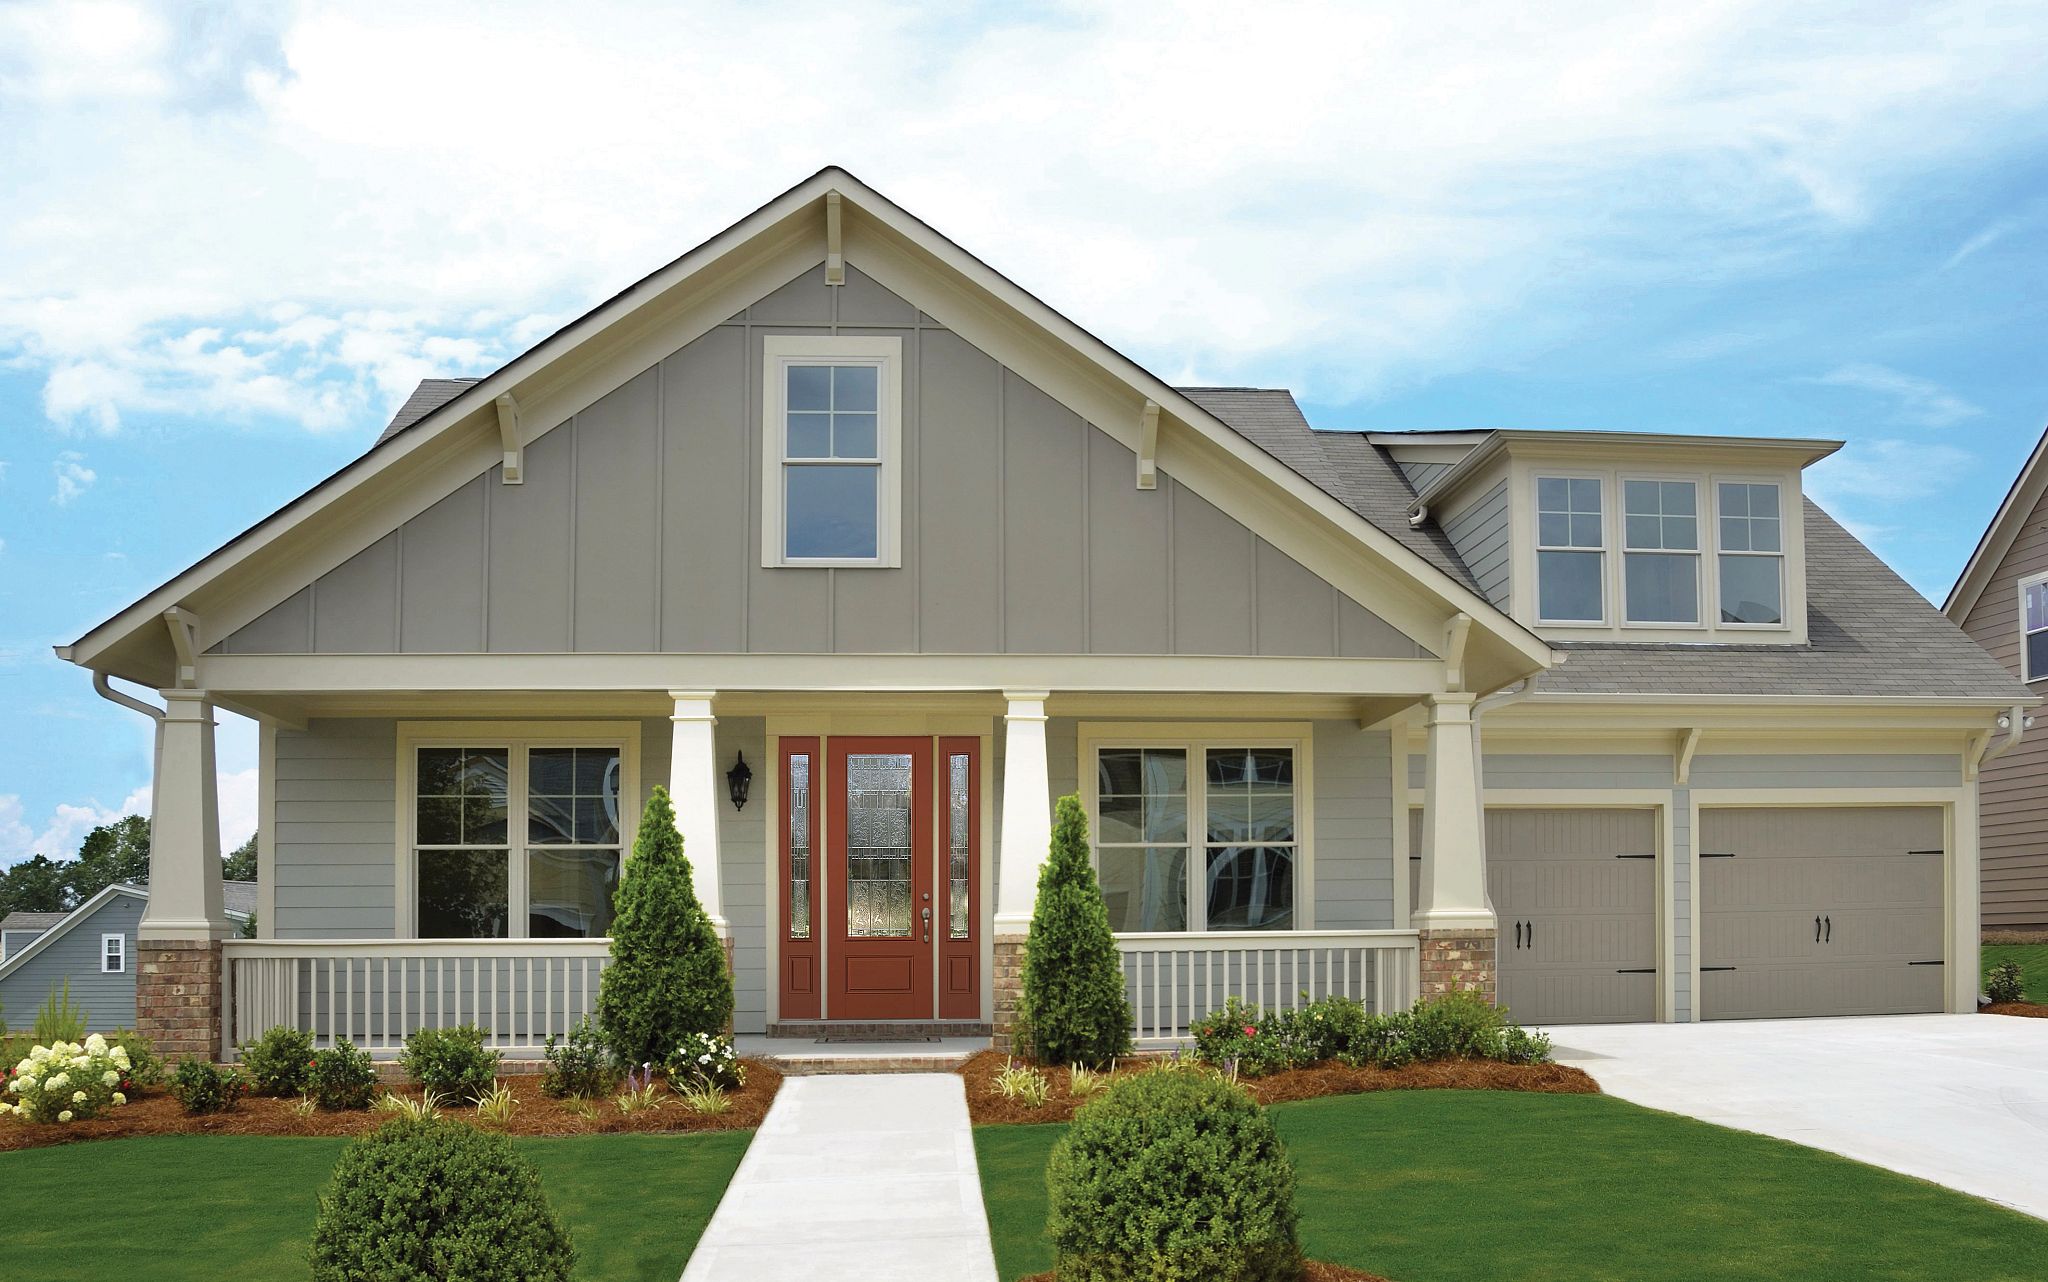 Take Your Home to the Next Level with PVC Millwork’s Window Pediment Options